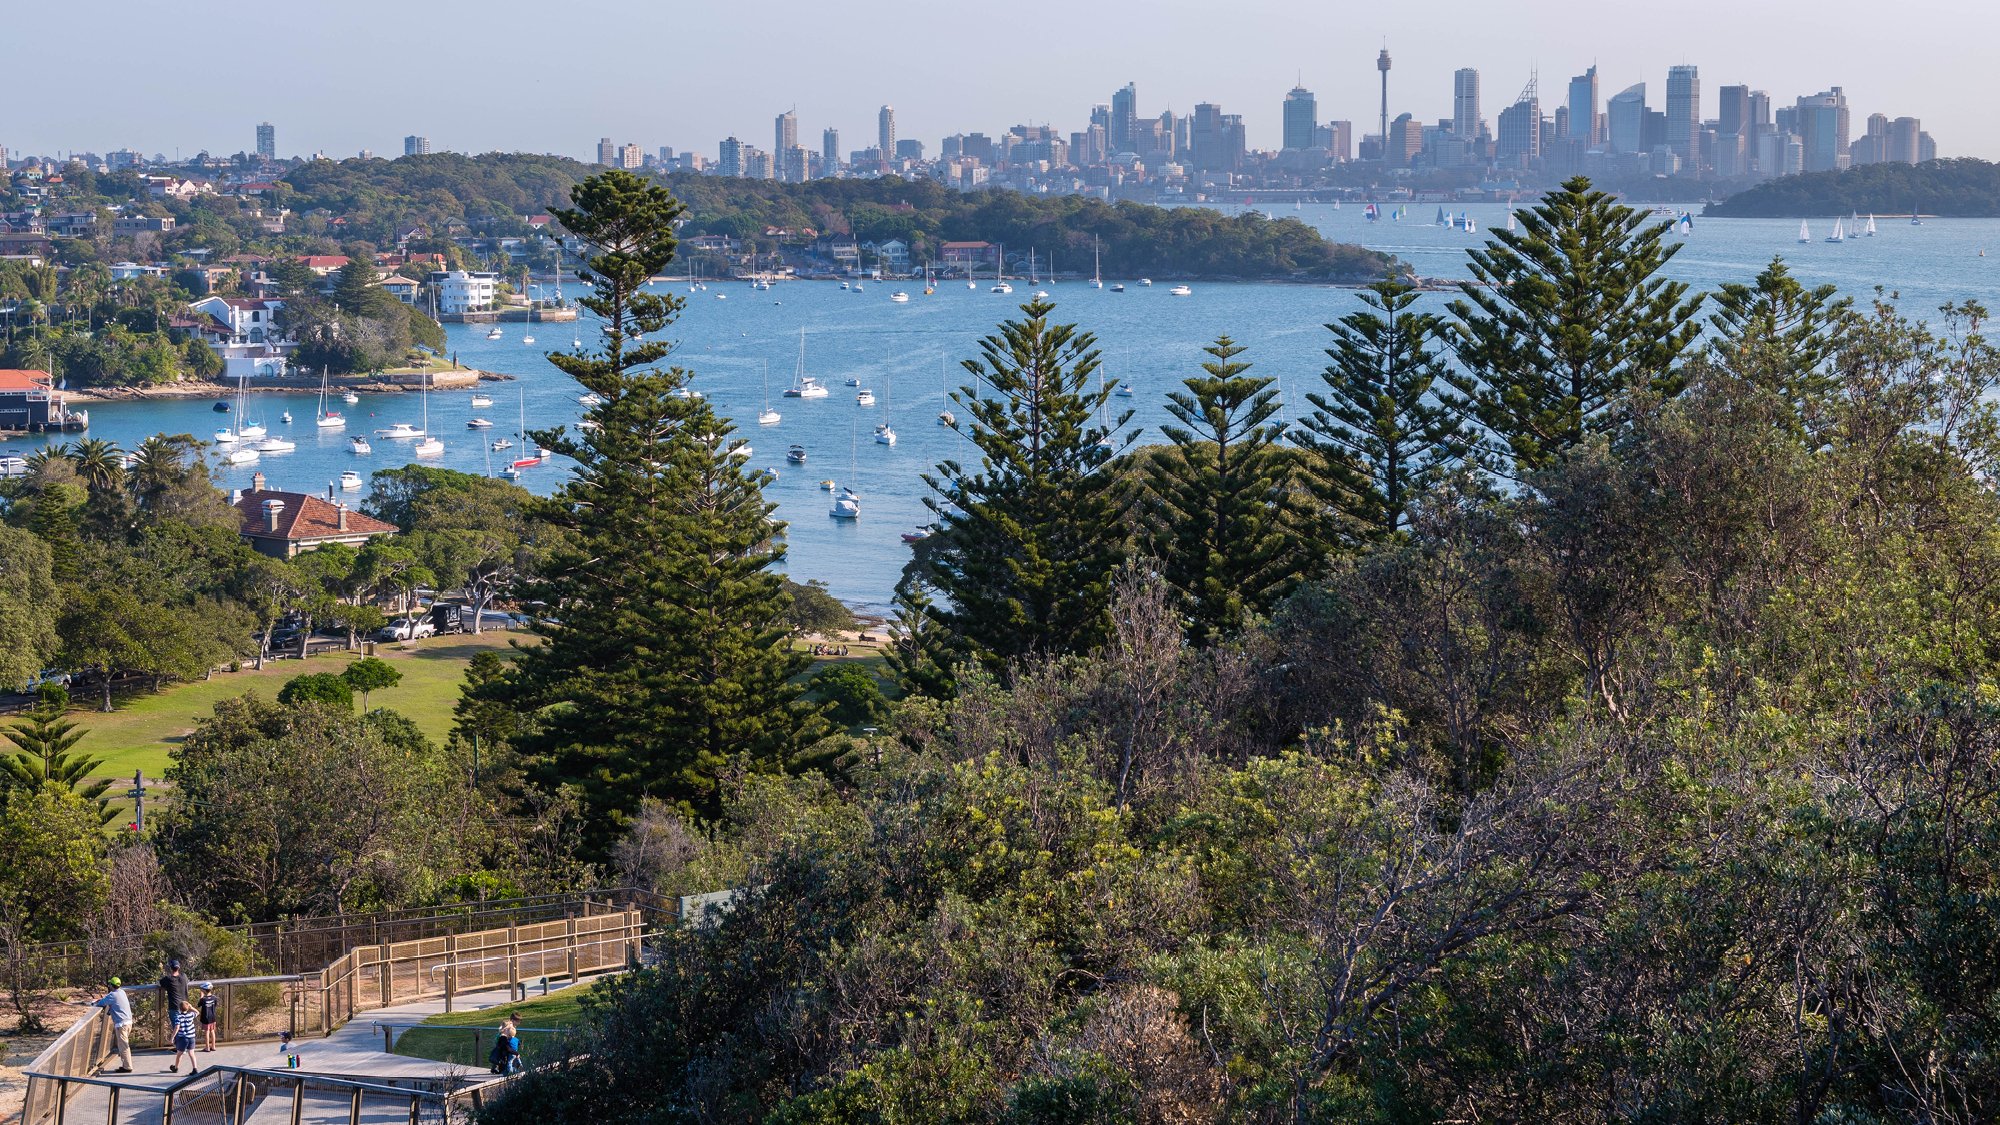 Far away view of Sydney city and harbour from above trees, parks, houses on a sunny day